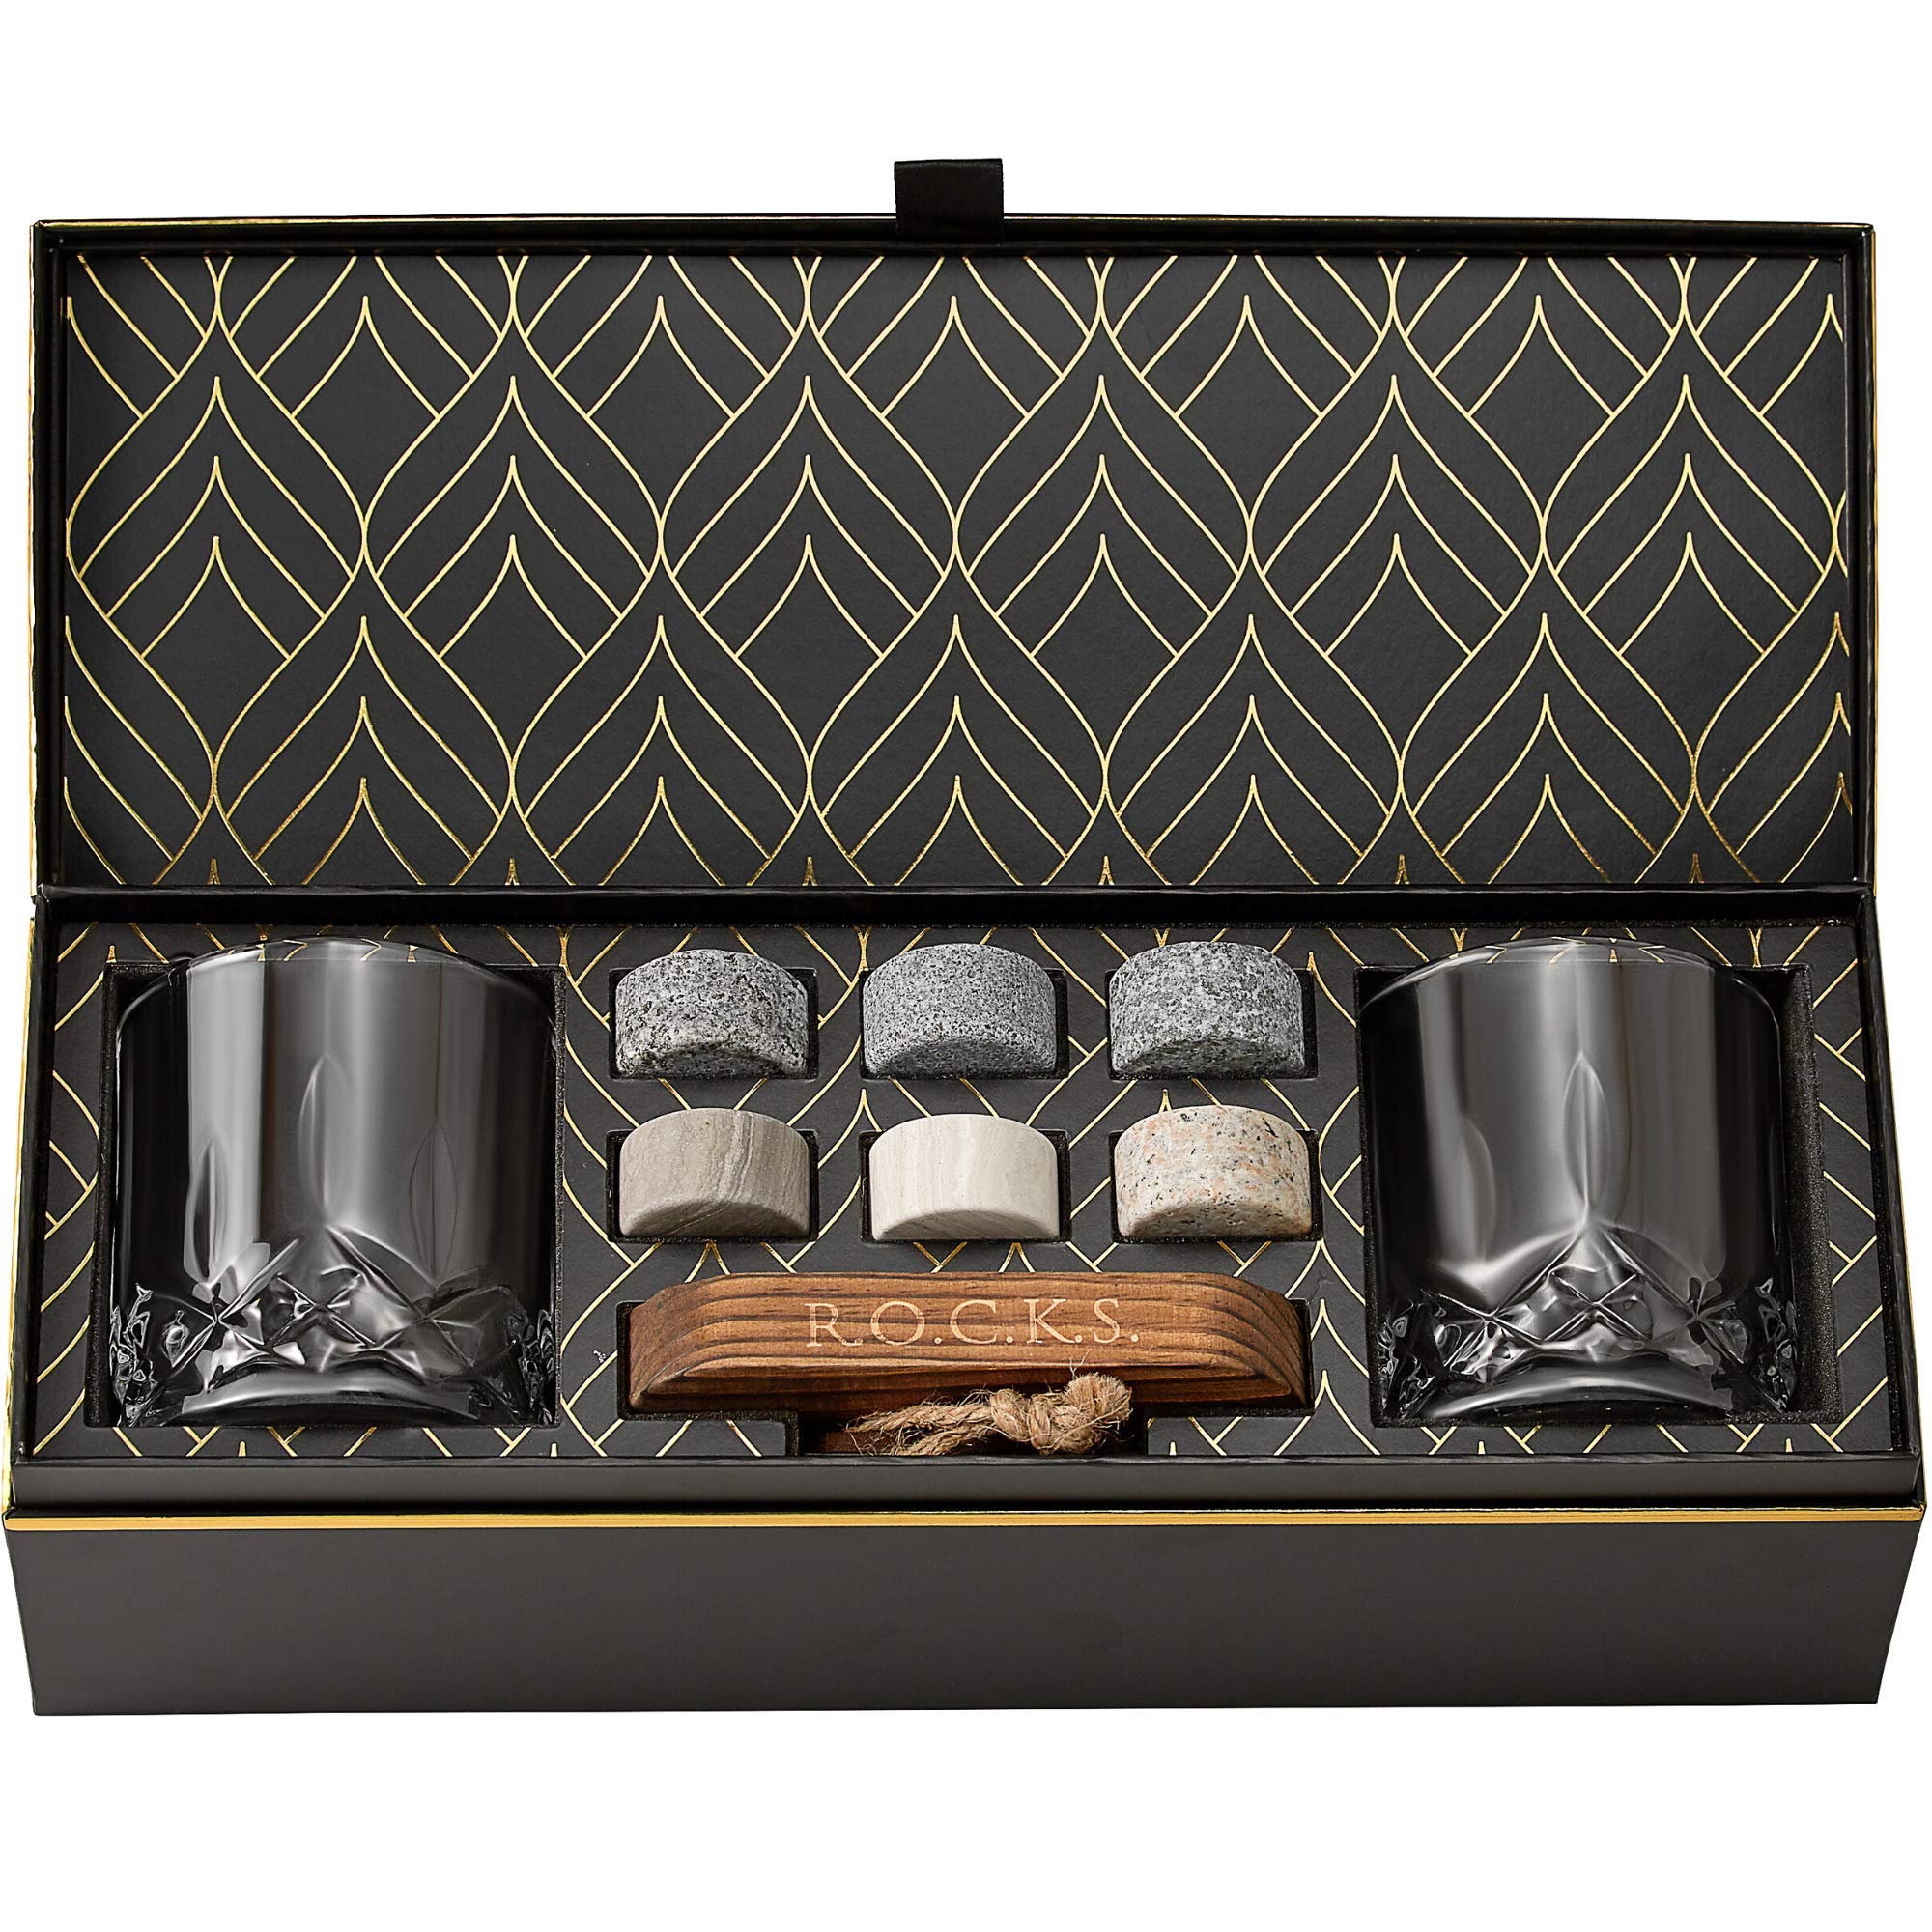 Whiskey Chilling Stones Gift Set - 6 Handcrafted Premium Granite Round Sipping Rocks - 2 Crystal Glass Tumblers - Hardwood Presentation & Storage Tray - Elegant Gold Foil Gift Box by R.O.C.K.S.